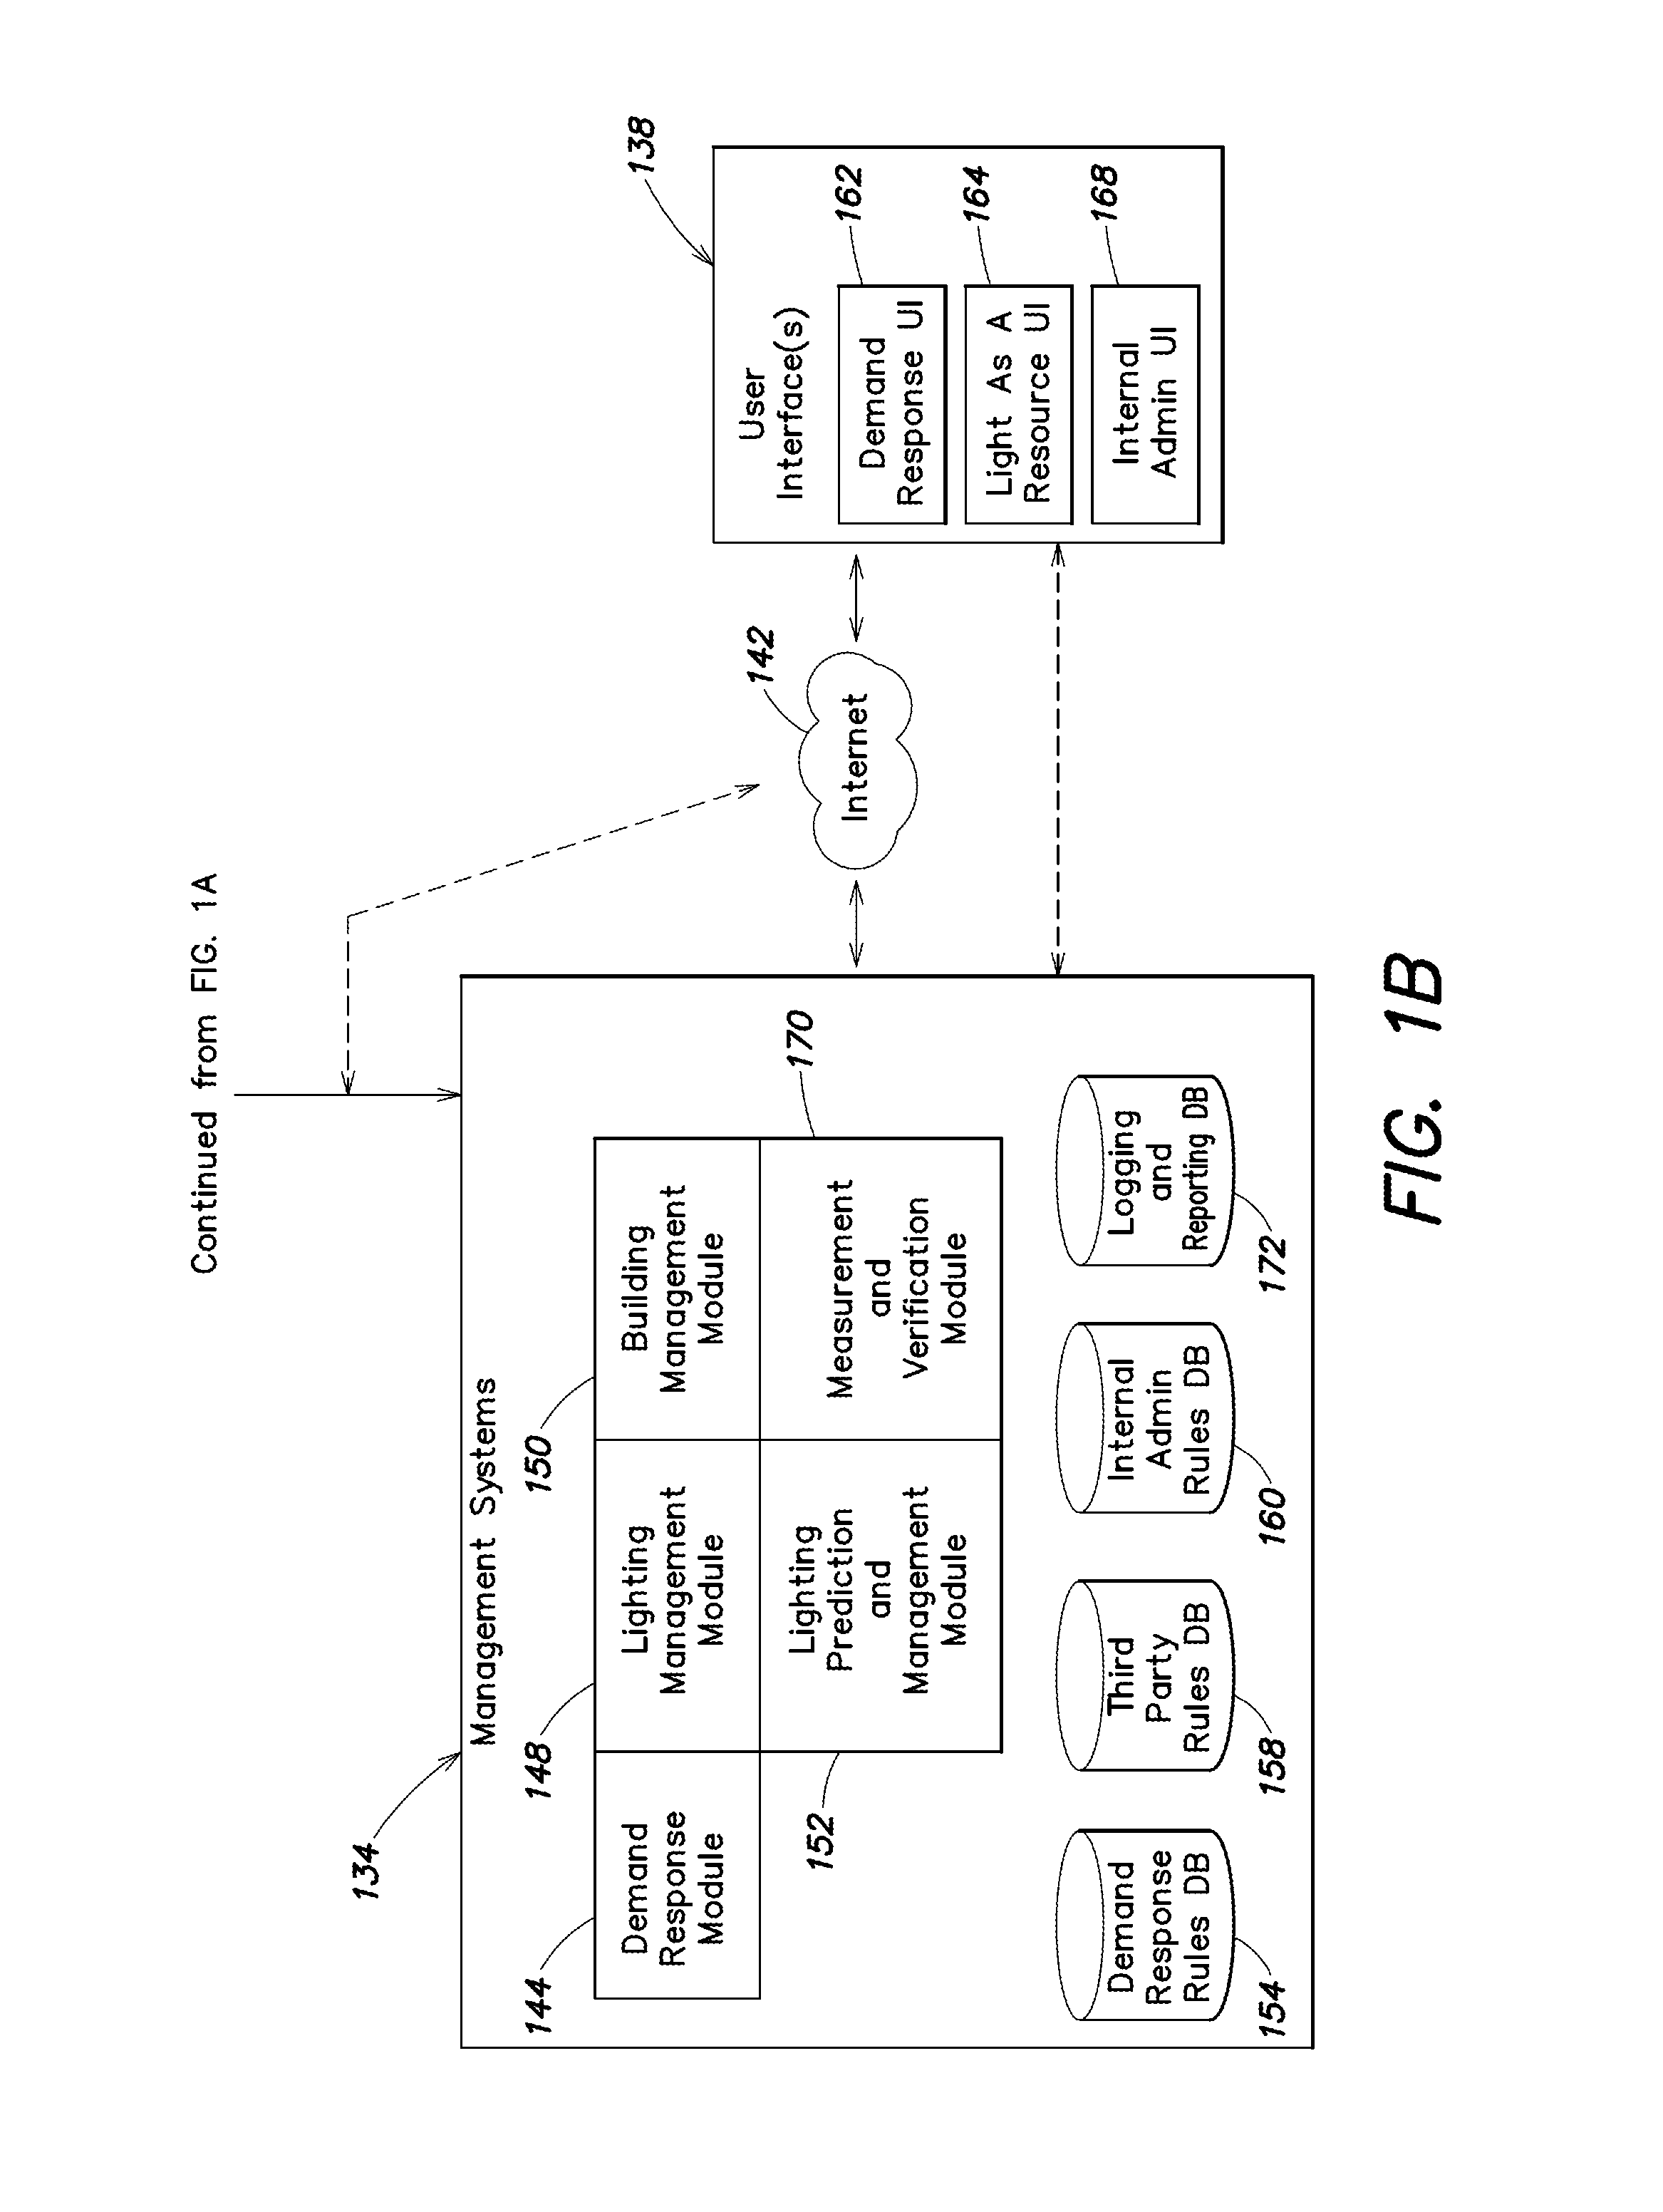 LED lighting methods, apparatus, and systems including historic sensor data logging